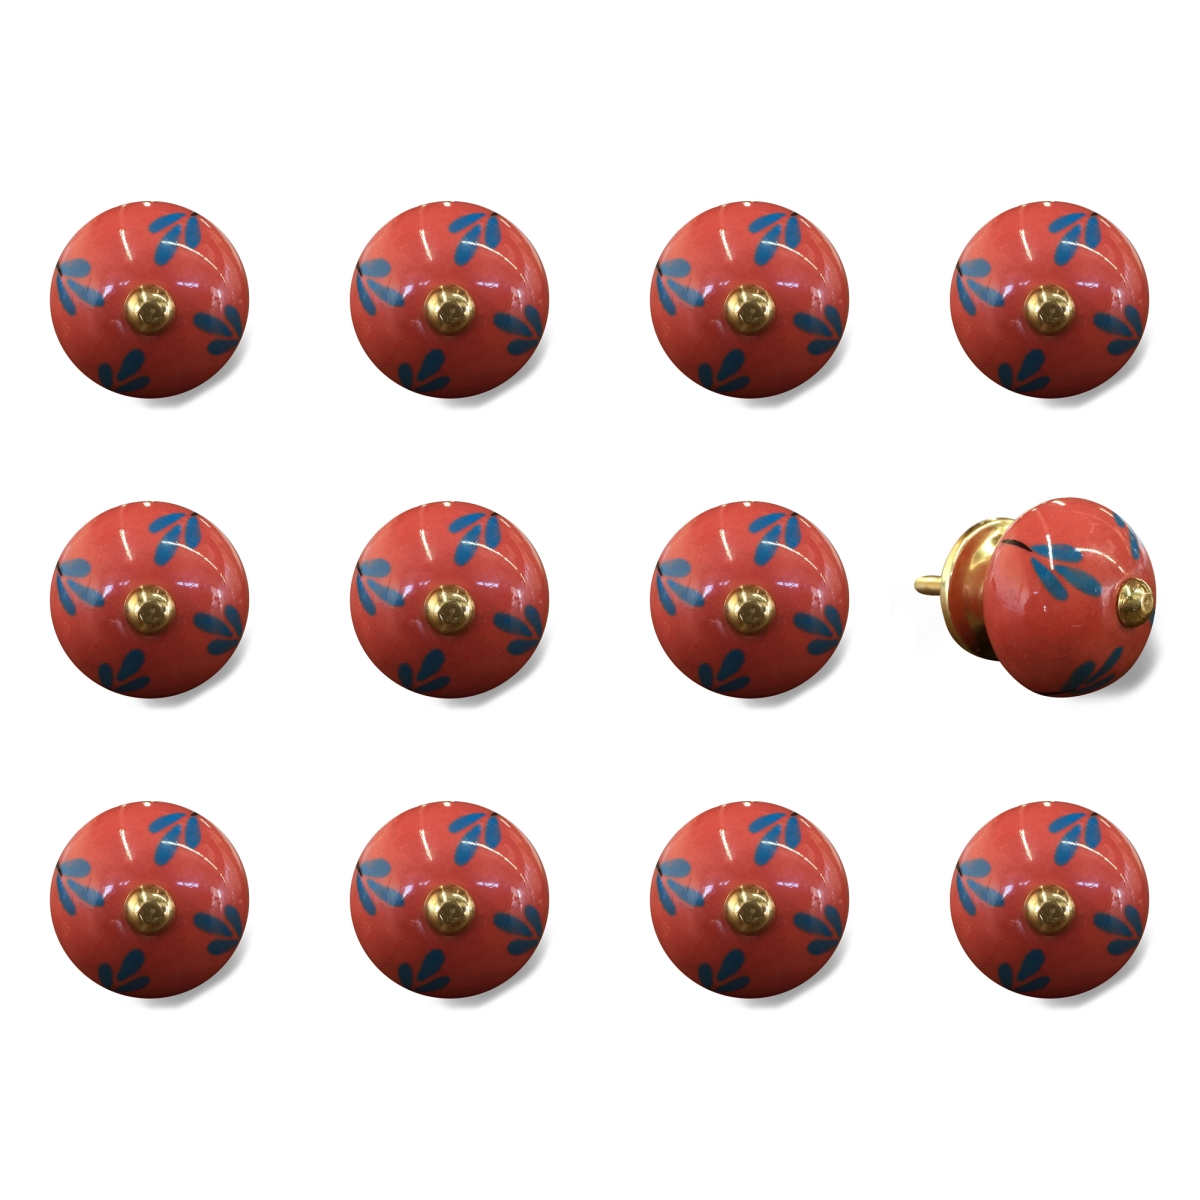 676685033031 Vintage Hand Painted Round Knob Set - Coral & Blue - Pack Of 12